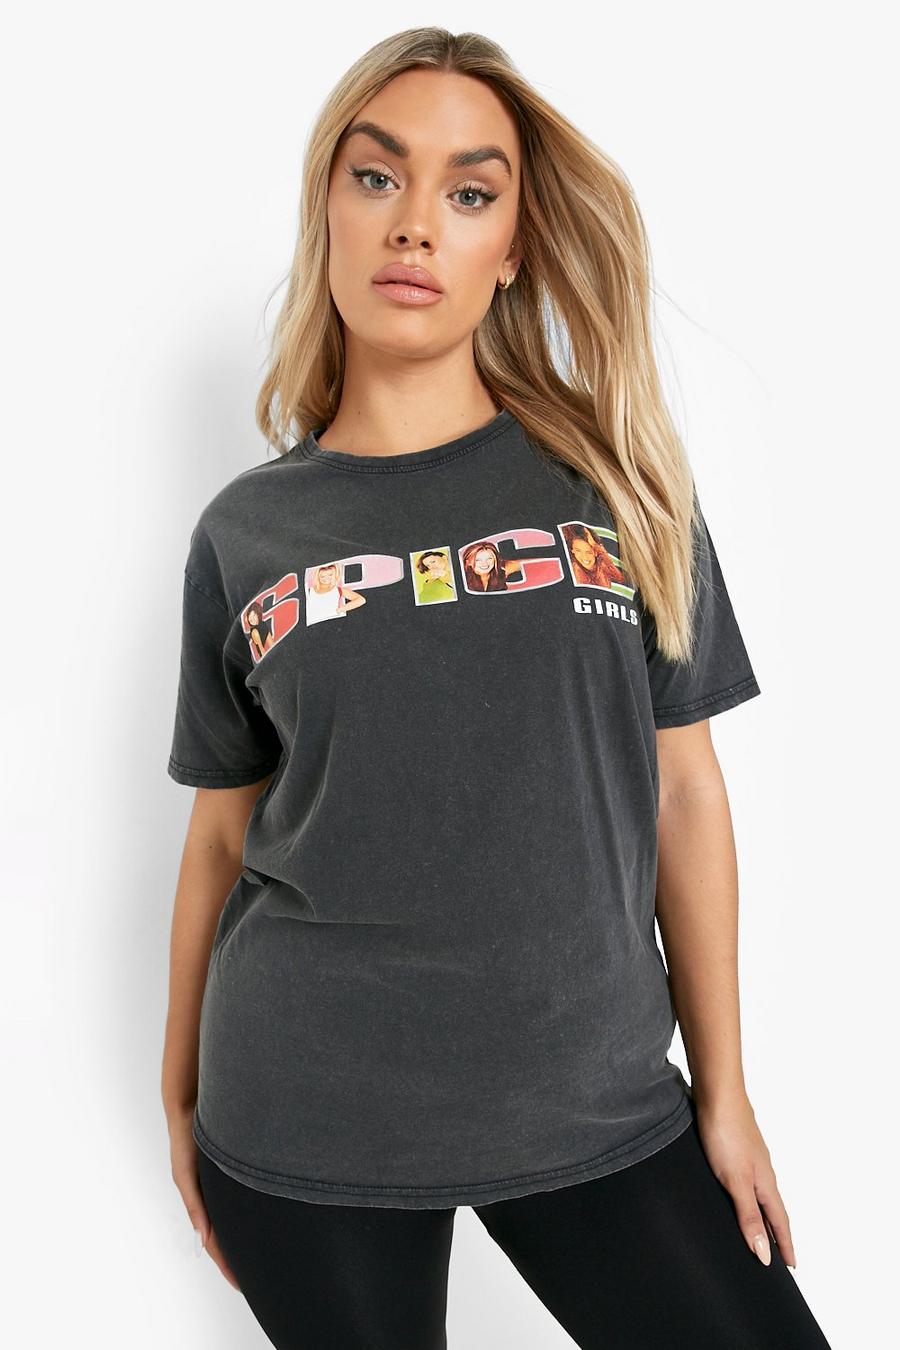 T-shirt Plus Size ufficiale Spice Girls in lavaggio acido, Charcoal image number 1